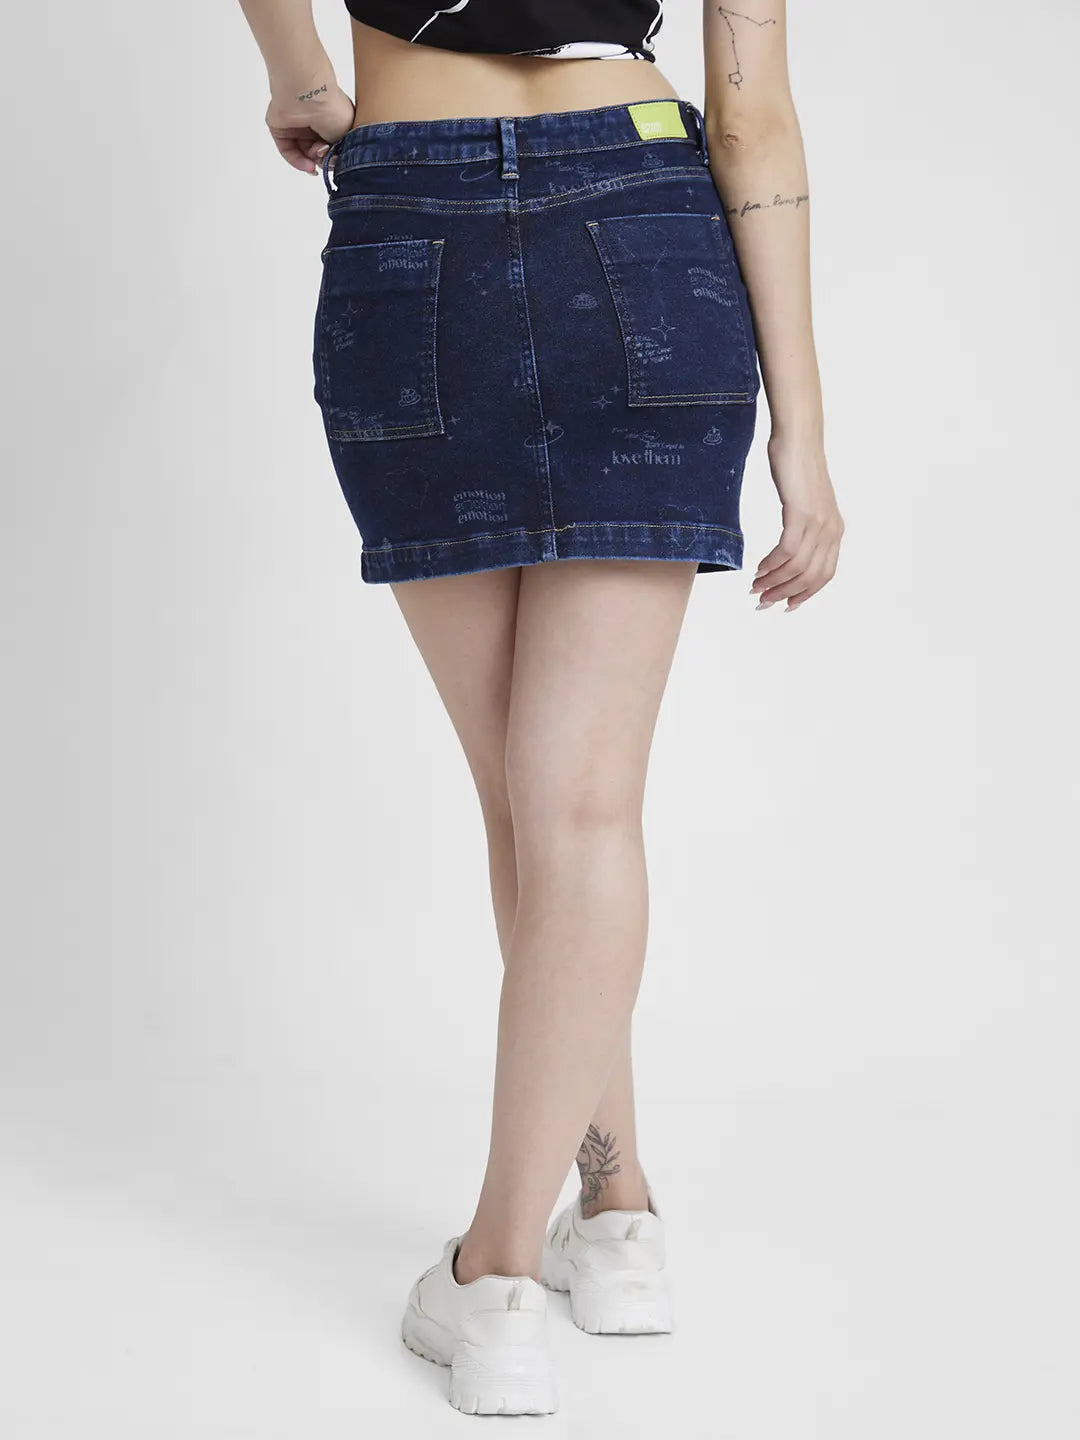 Aggregate more than 215 jeans skirt for women super hot